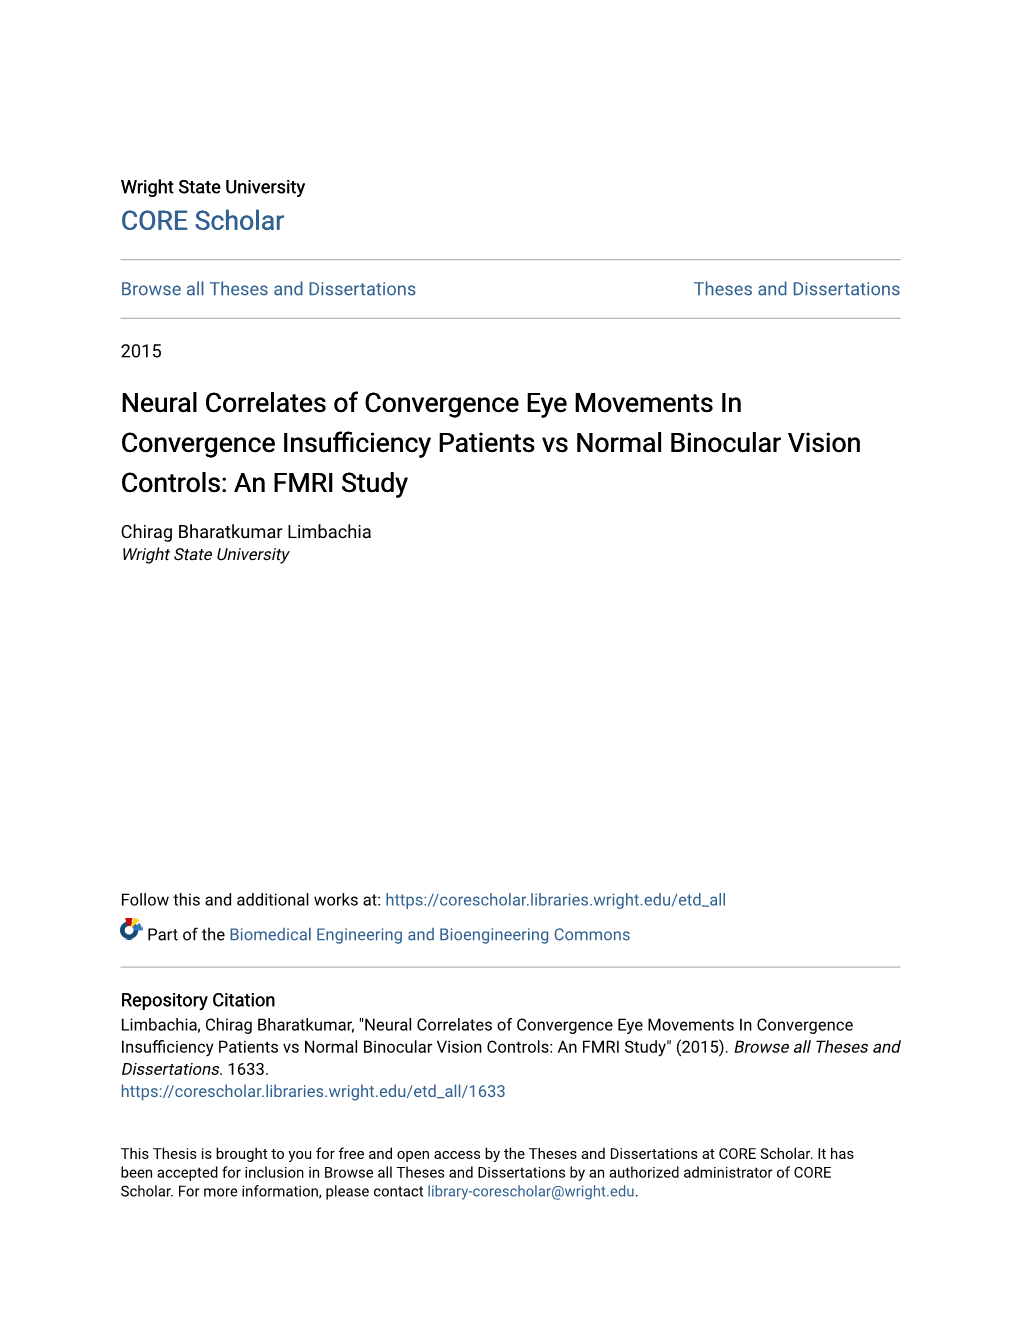 Neural Correlates of Convergence Eye Movements in Convergence Insufficiency Patients Vs Normal Binocular Vision Controls: an FMRI Study" (2015)